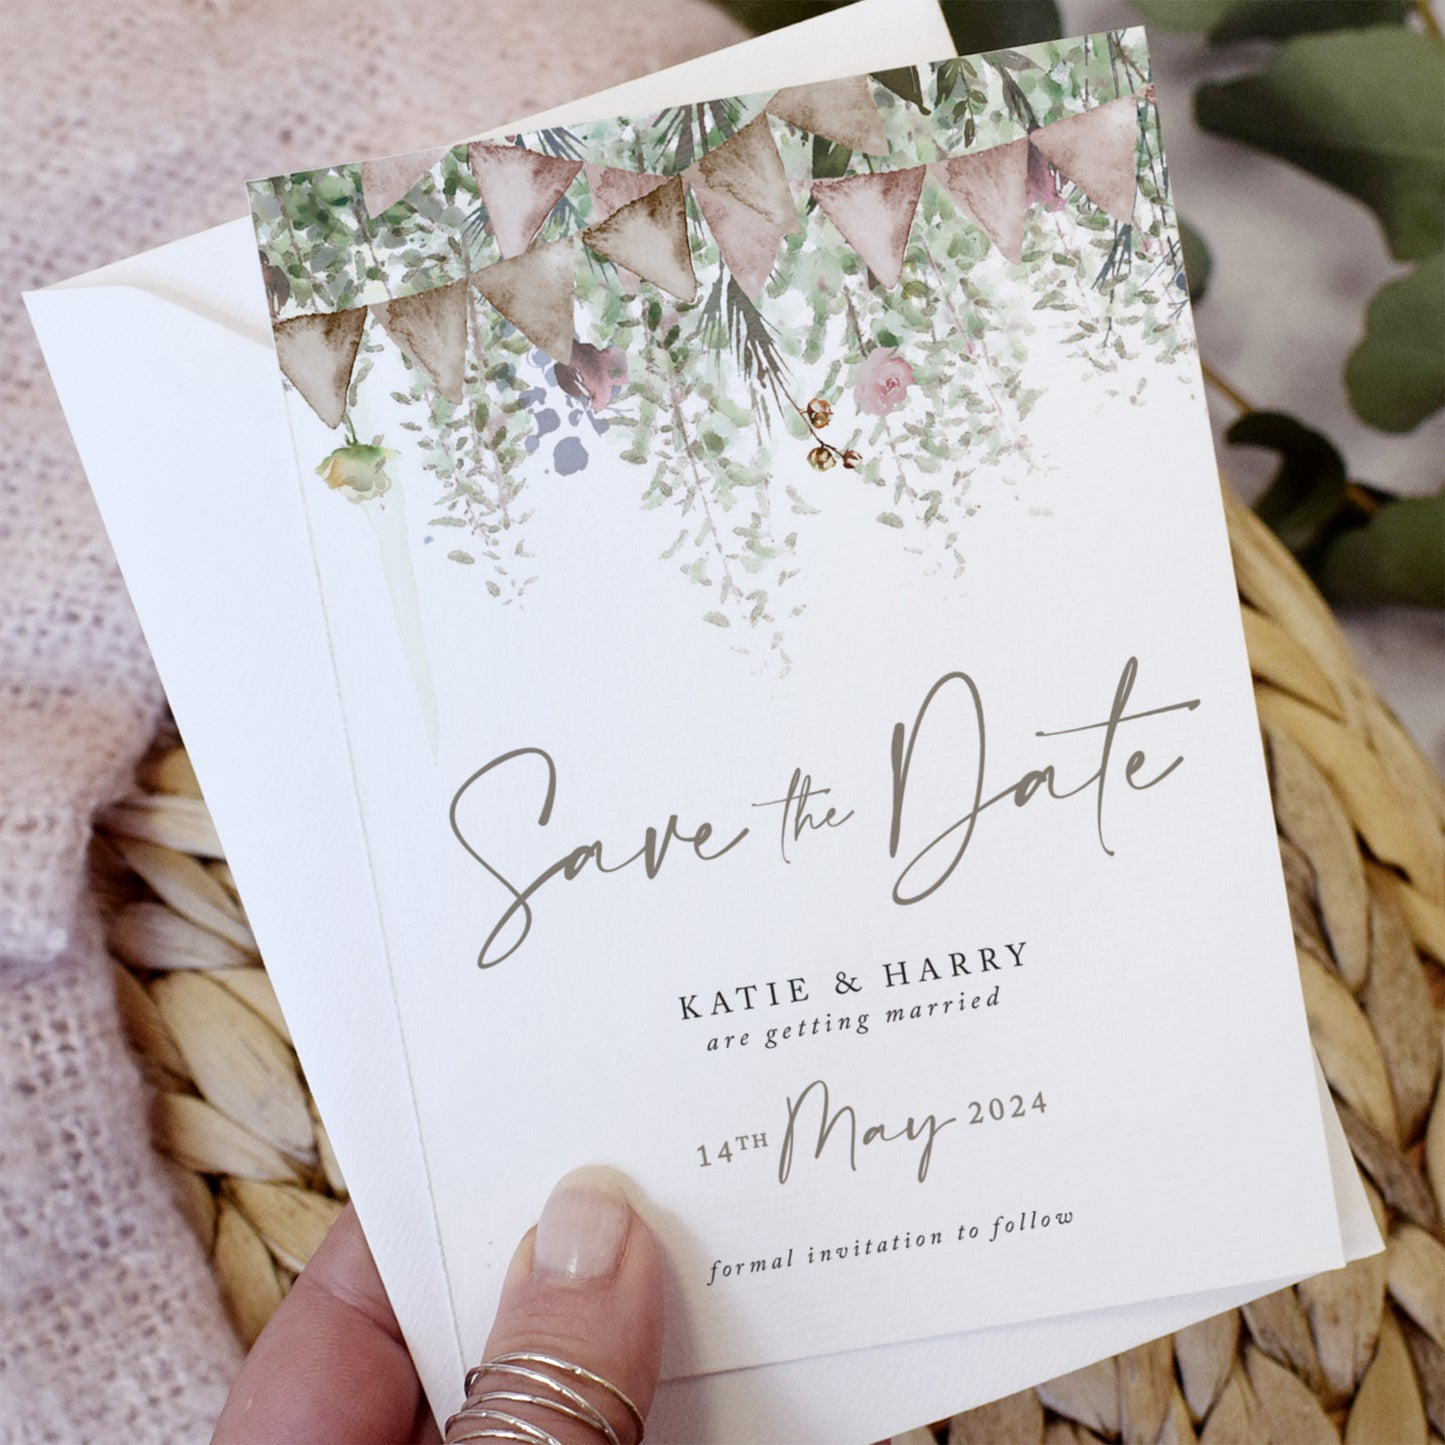 Whimsical Barn A6 Save the date cards